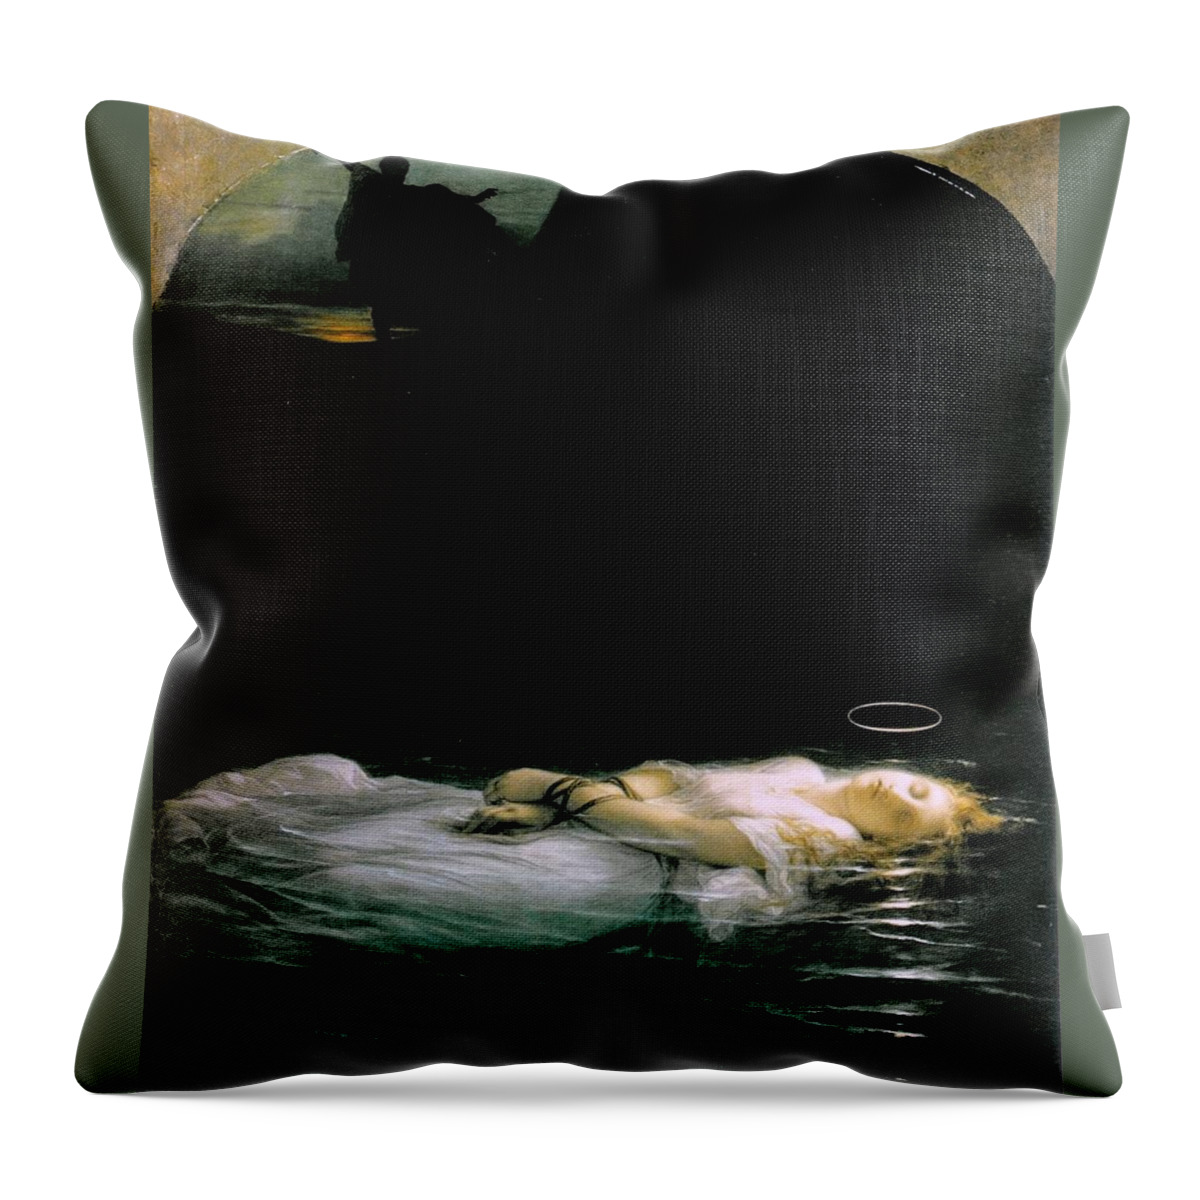 Paul Delaroche - The Young Martyr 1855 Throw Pillow featuring the painting The Young Martyr by MotionAge Designs